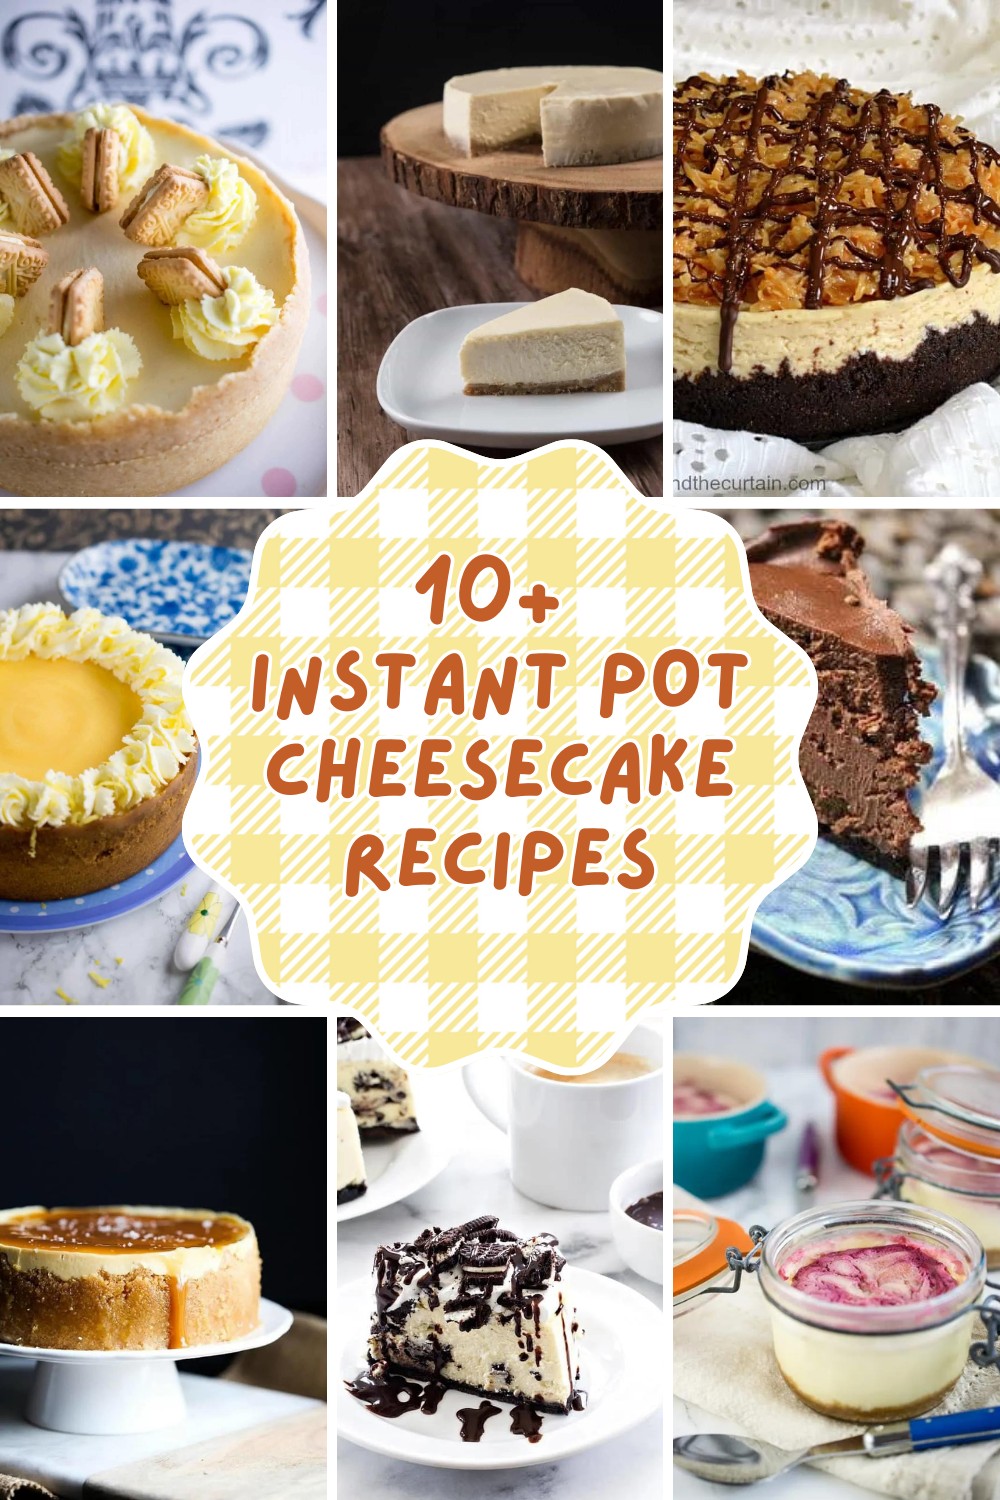  Indulge in the rich and creamy decadence of Instant Pot Cheesecake. So easy to make, it’s the ultimate reason to buy an Instapot! Treat yourself to this effortlessly delicious dessert. 🧀🍰 #DessertGoals #InstantPotCheesecake